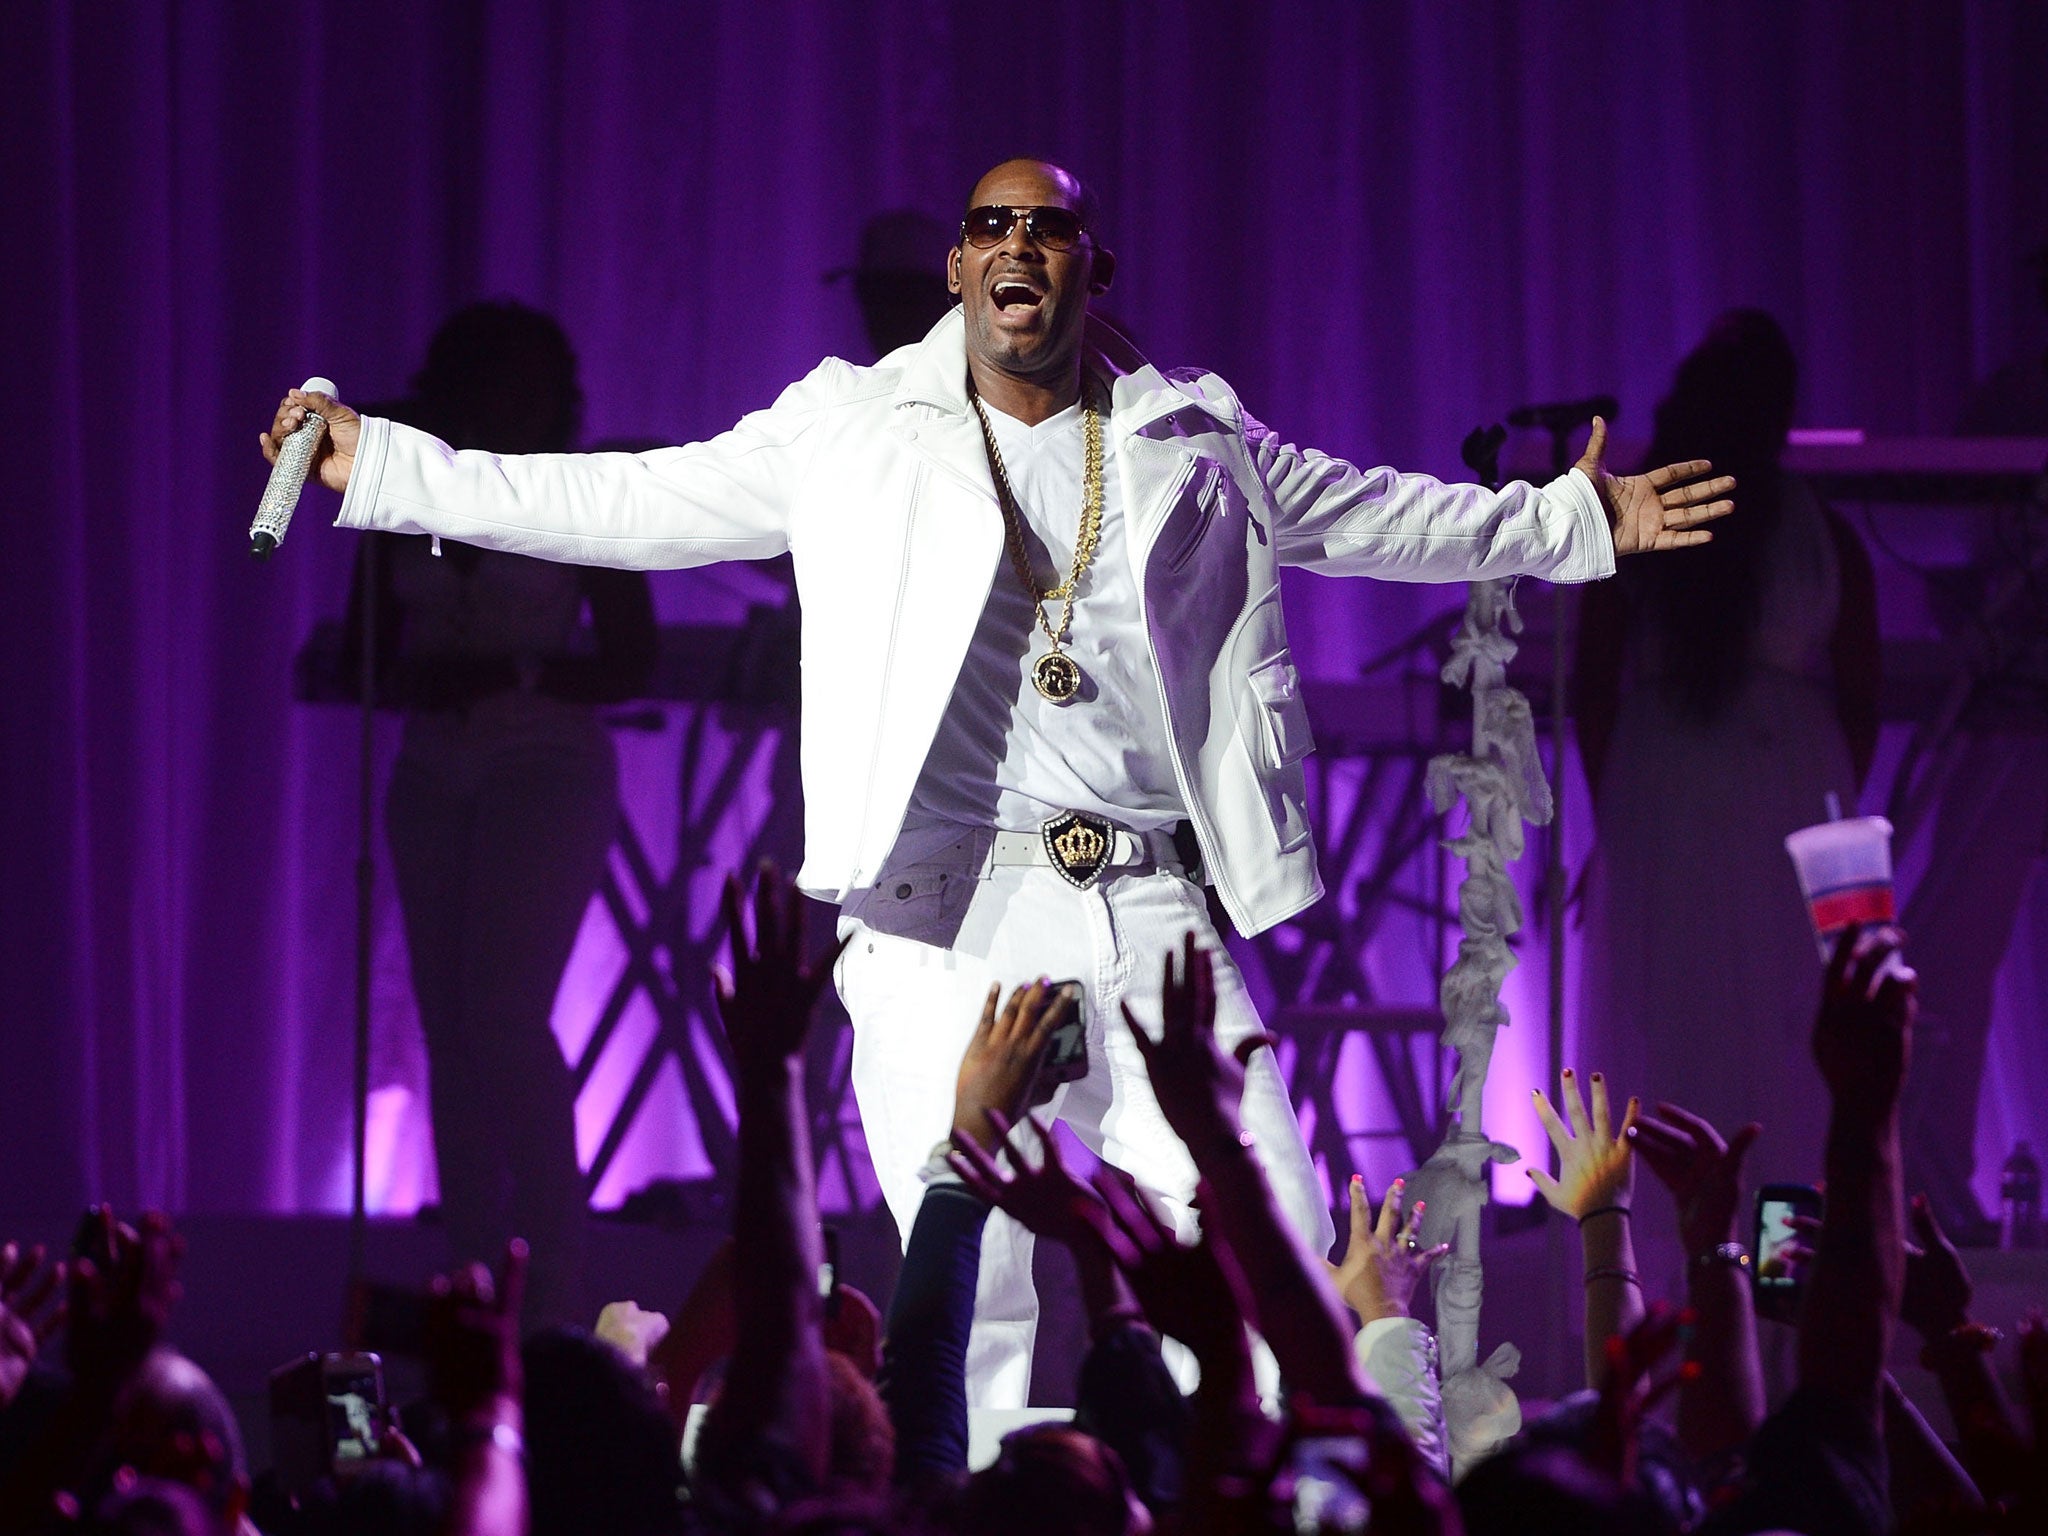 What will R Kelly's fans make of the Black Panties sequel?